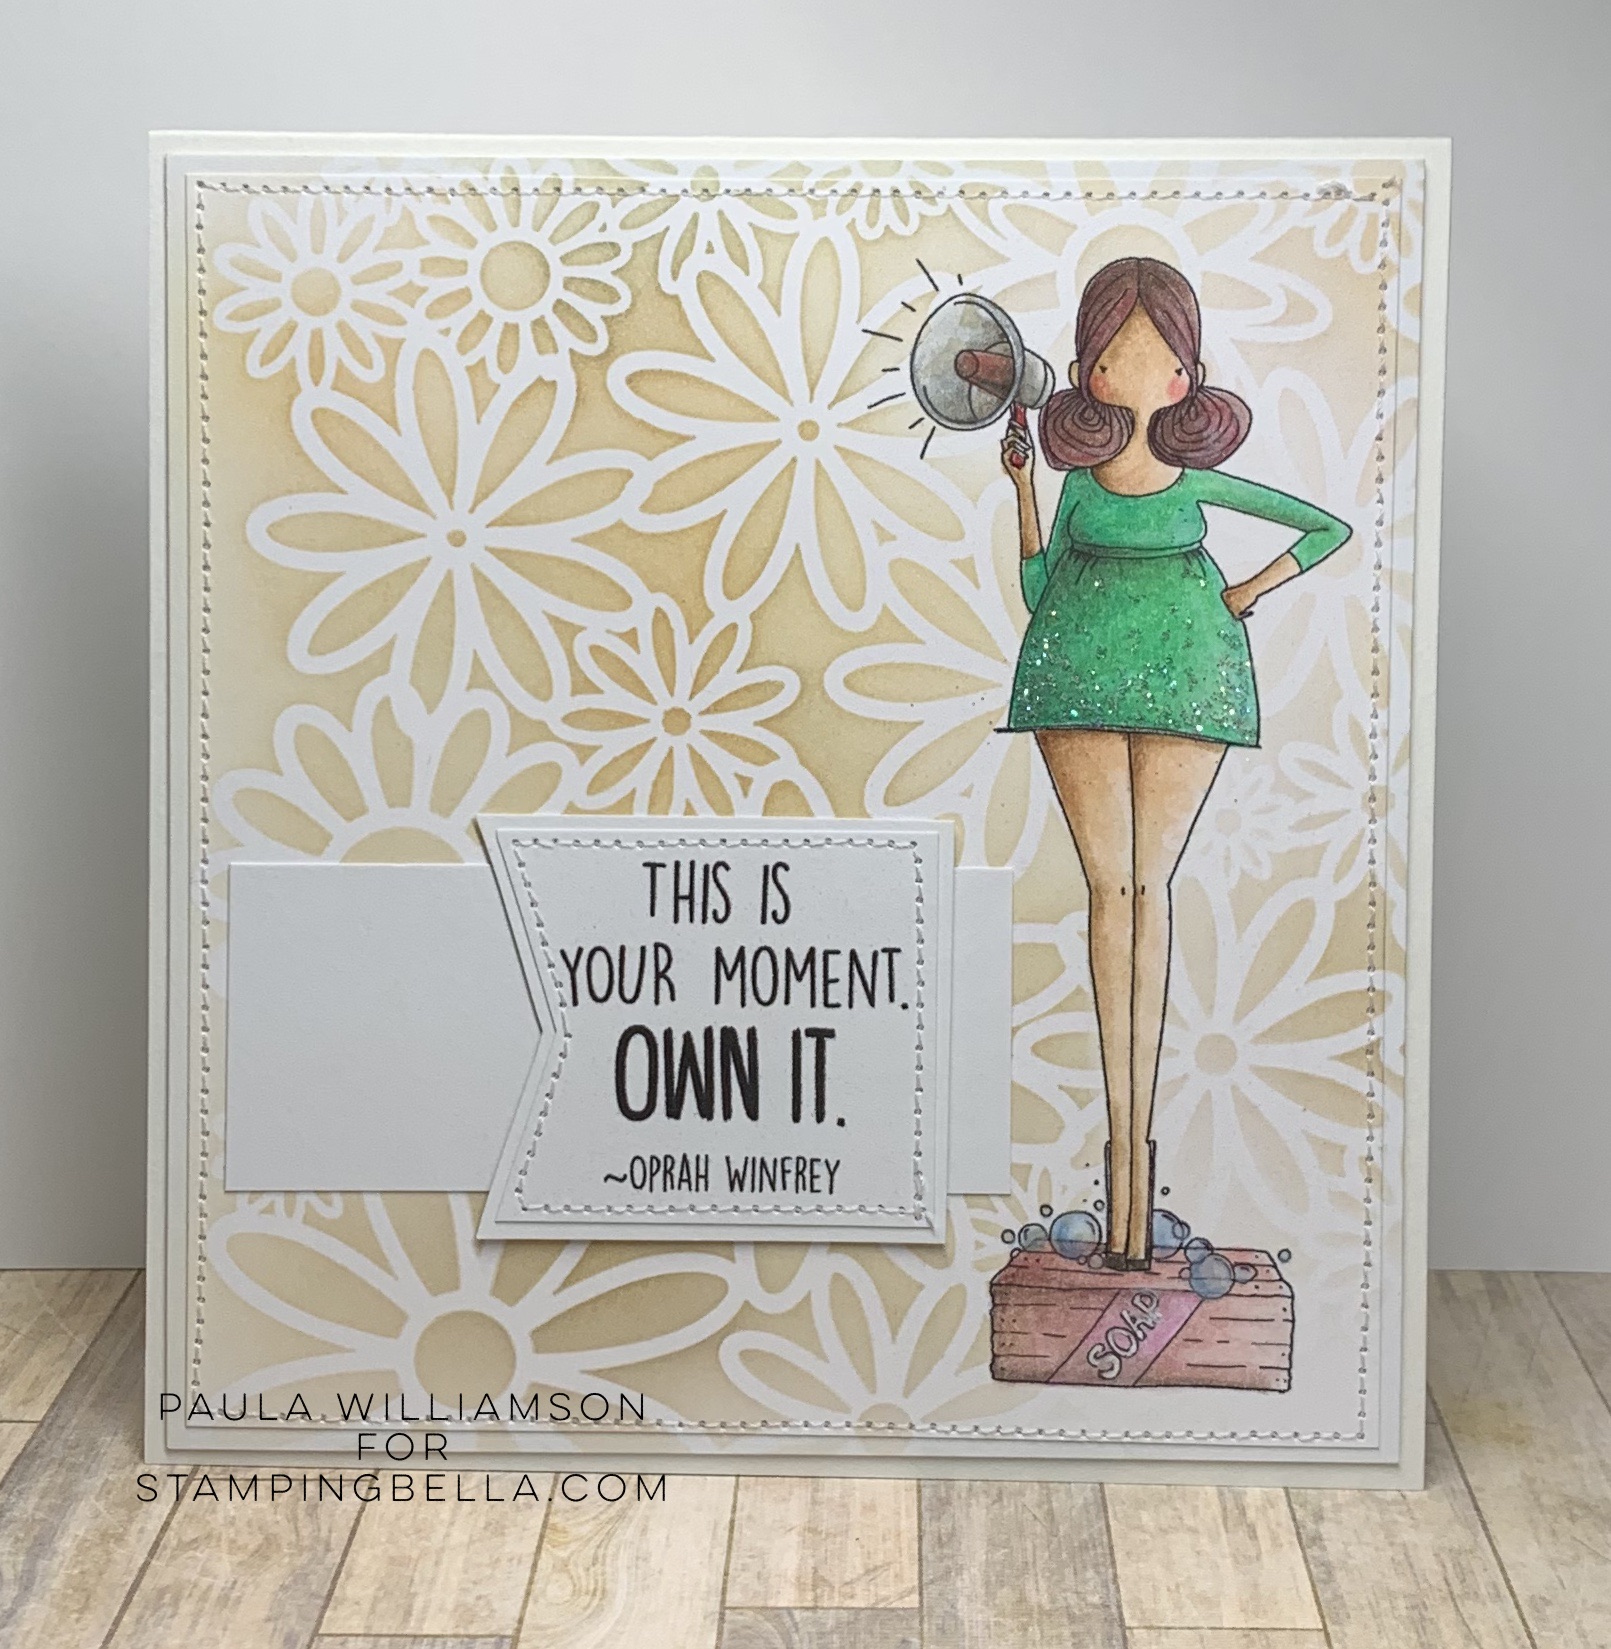 www.stampingbella.com: rubber stamp used: CURVY GIRL WITH A MESSAGE. Card by Paula Williamson